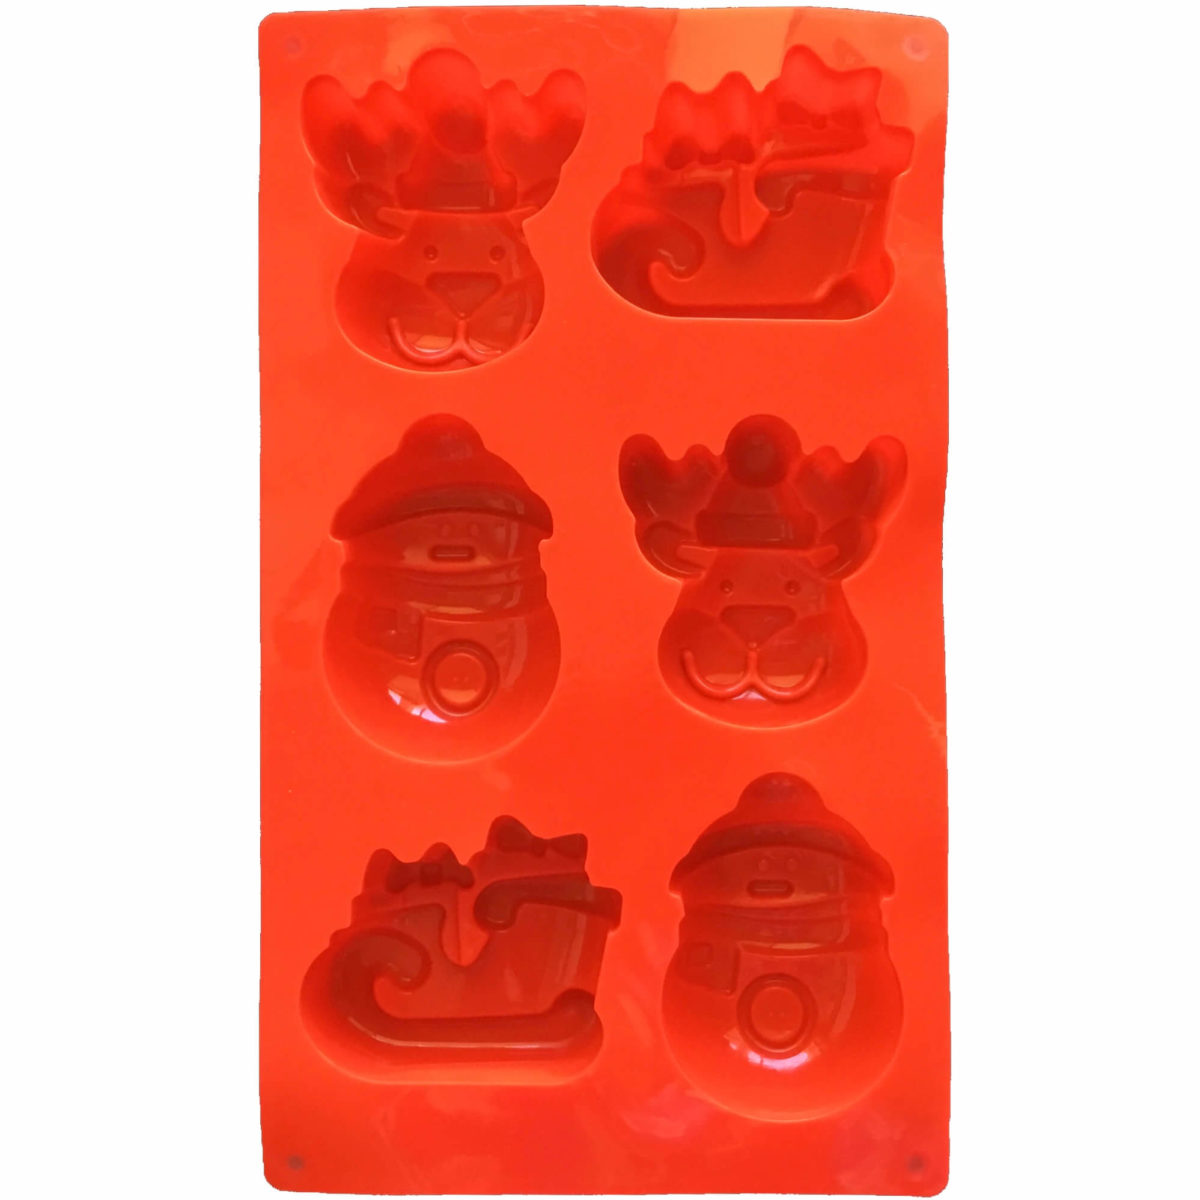 back of ed christmas themed silicone mould with six cavities - two each of santa sleigh, reindeer face, snowman cavities showing cavity details